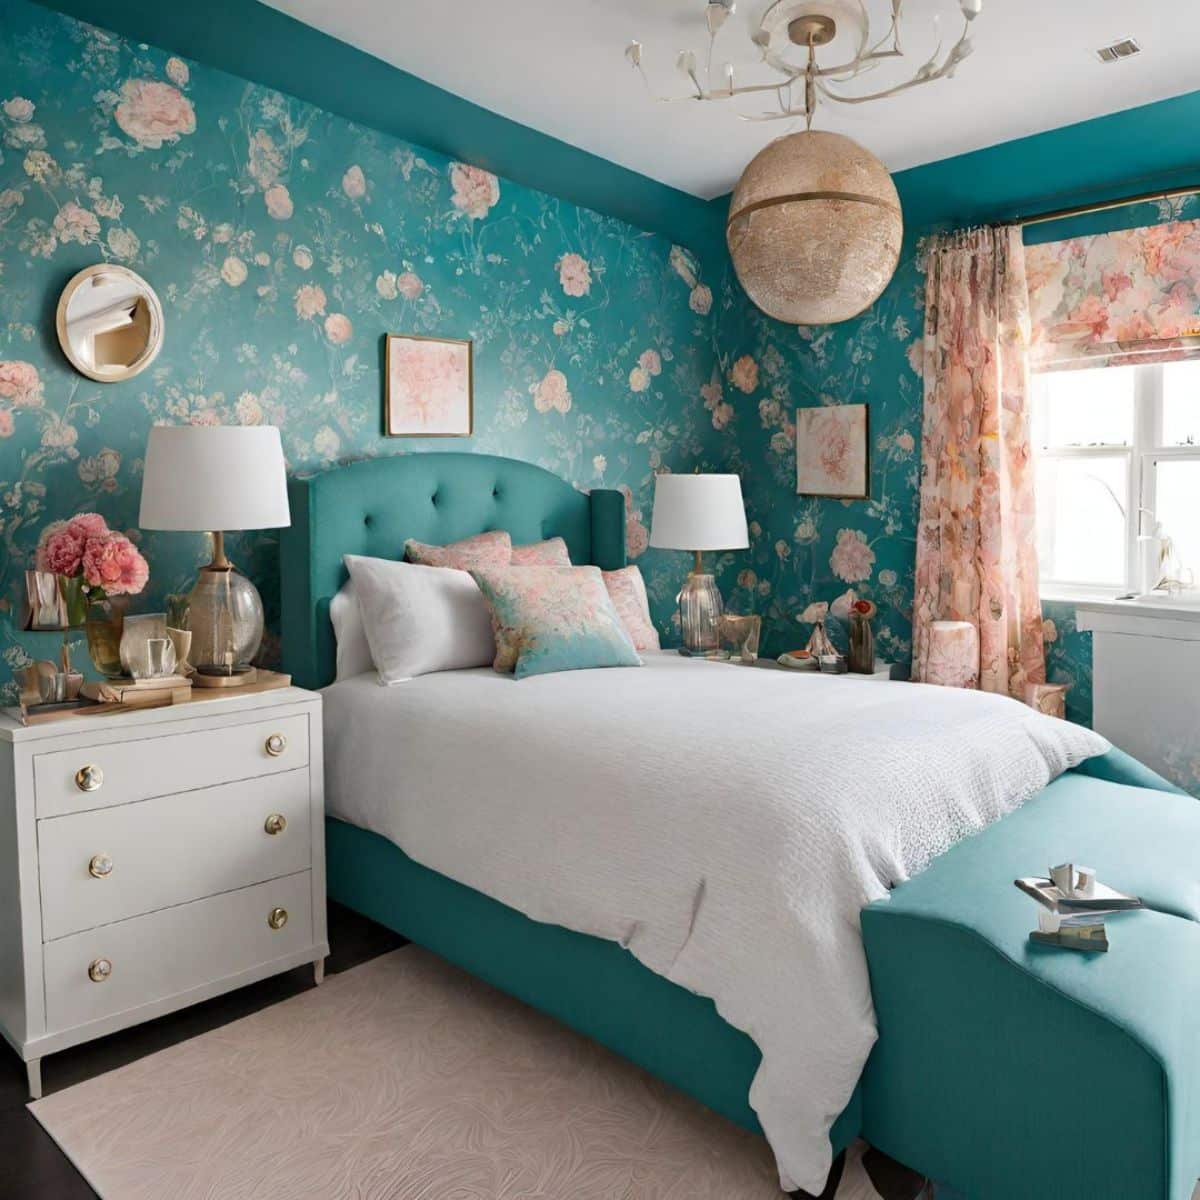 a teal bedroom with cute printed wallpaper